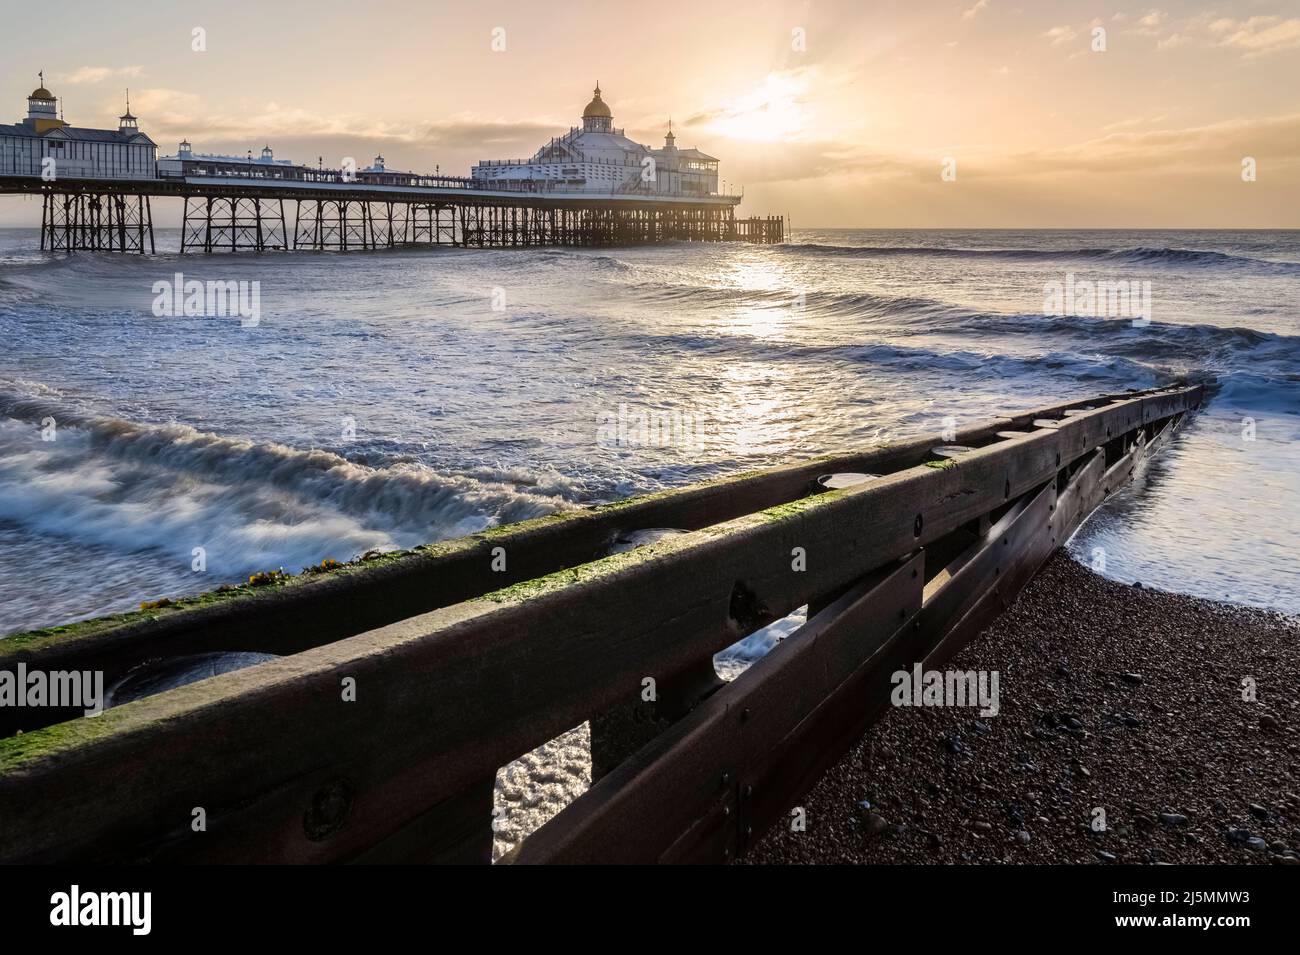 View of the Palace pier at sunrise. Brighton, East Sussex, Southern England, United Kingdom. Stock Photo